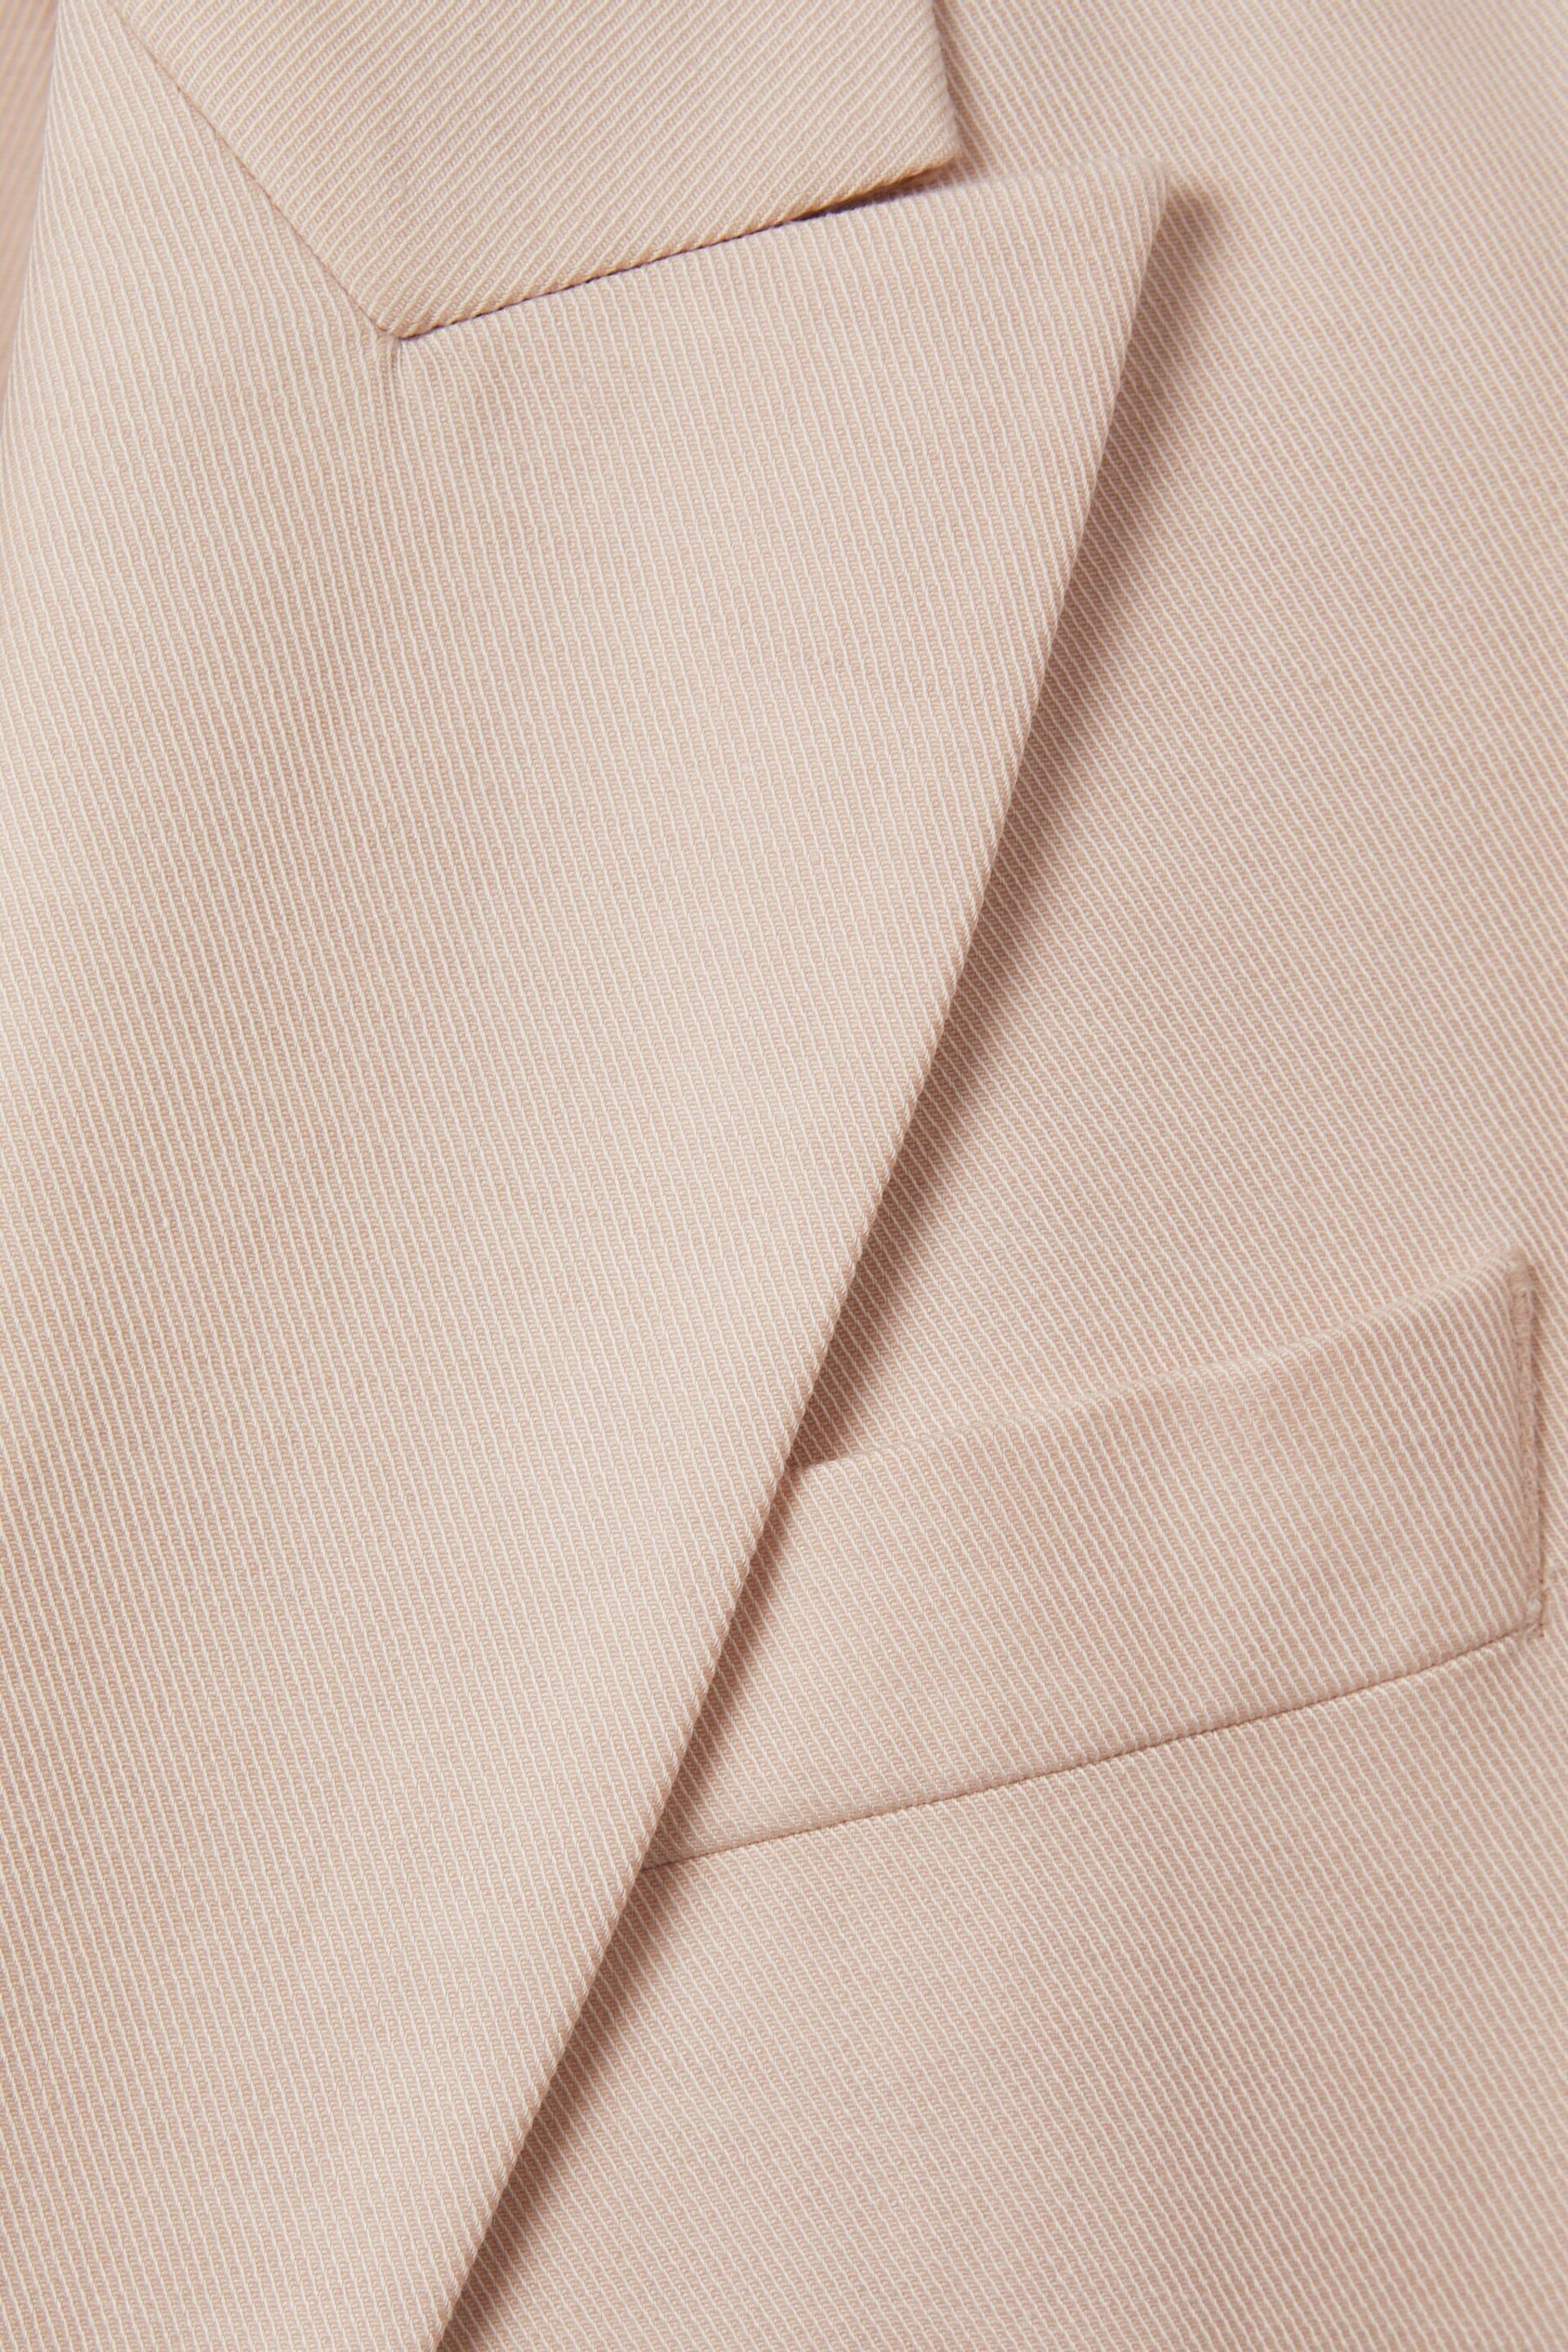 Reiss Pink Farrah Single Breasted Suit Blazer with TENCEL™ Fibers - Image 6 of 6